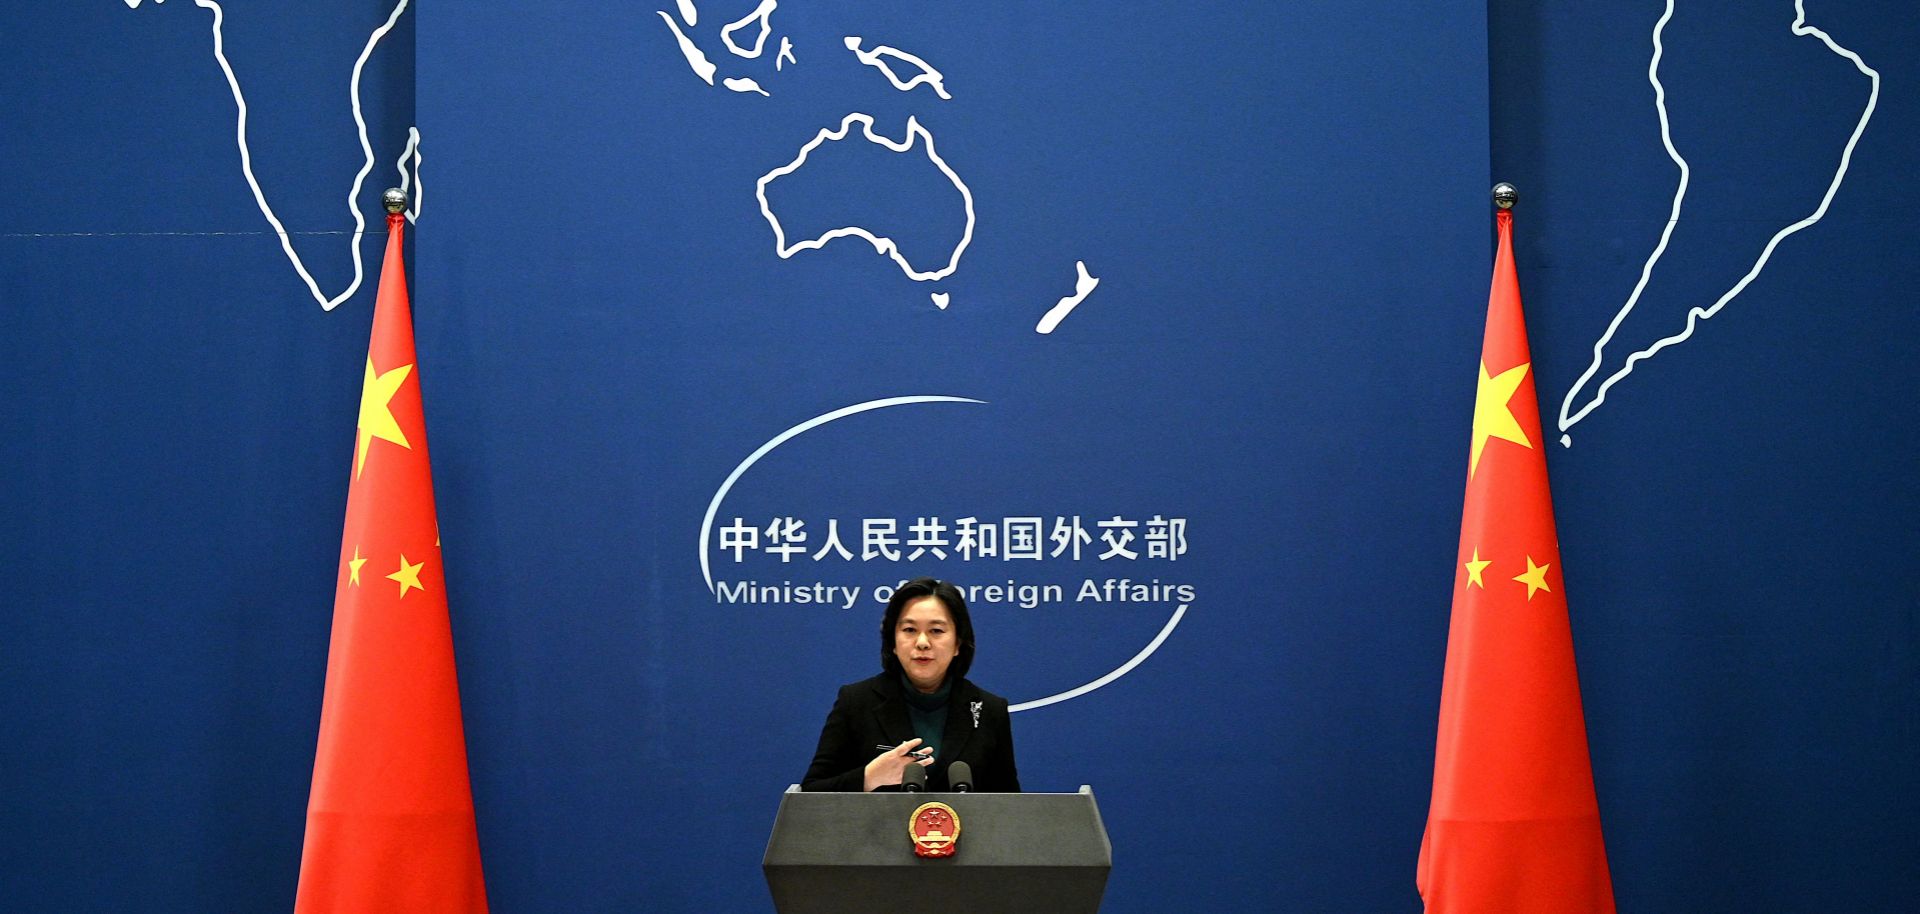 Chinese Foreign Ministry spokesperson Hua Chunying discusses the Russia-Ukraine crisis during a press conference in Beijing on Feb. 24, 2022. 